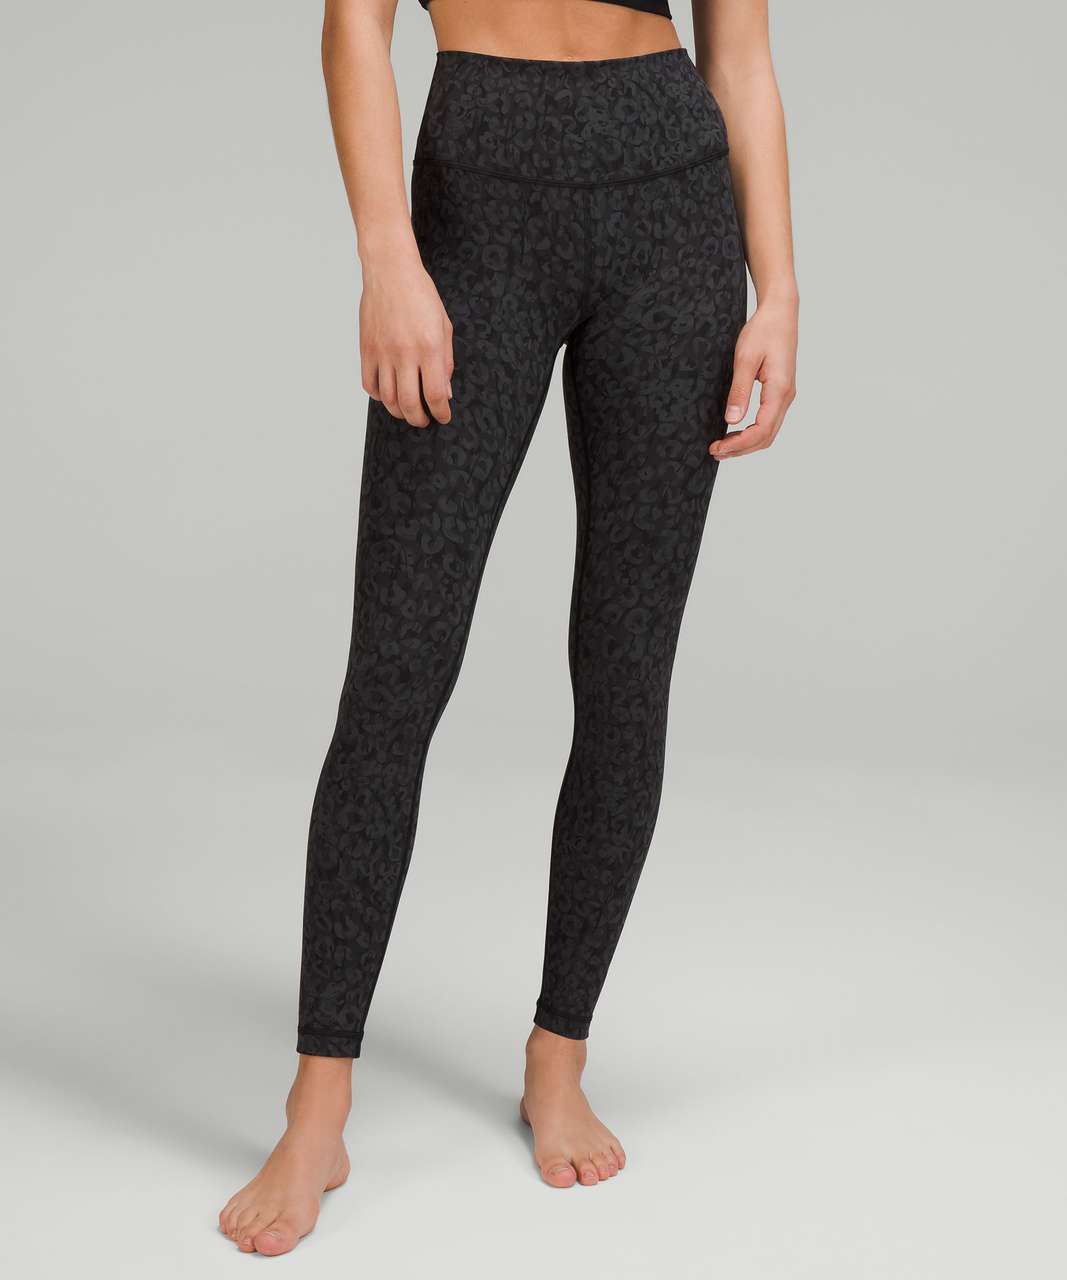 Lululemon Wunder Under High-Rise Tight 28" *Full-On Luxtreme - Intertwined Camo Deep Coal Multi